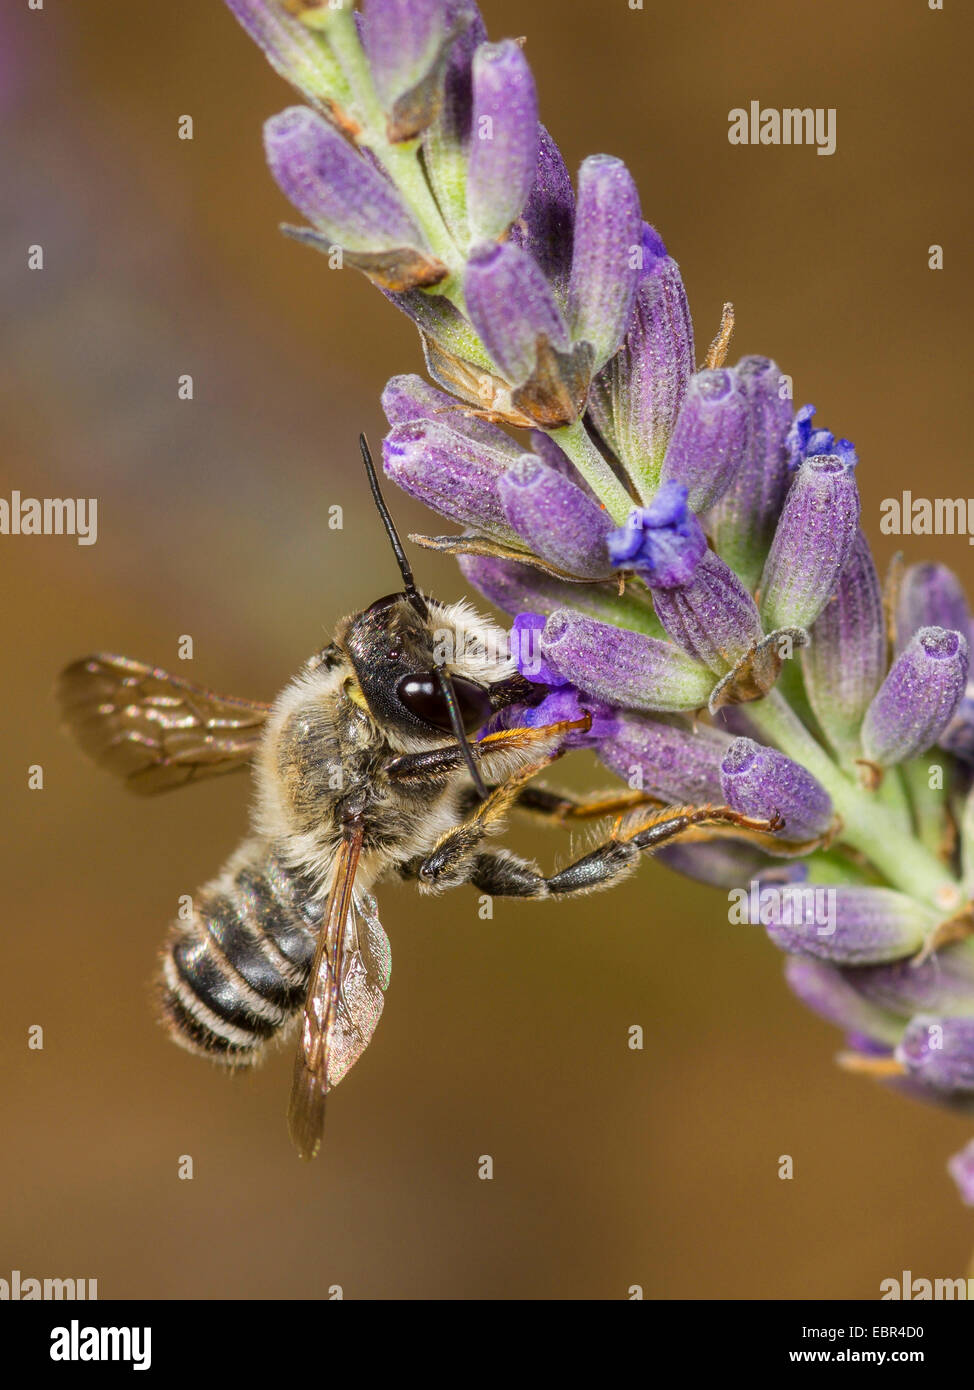 Leafcutter bee, Leafcutter-bee (Megachile ericetorum, Chalicodoma ericetorum, Pseudomegachile ericetorum), male foraging on English lavender (Lavandula angustifolia), Germany Stock Photo